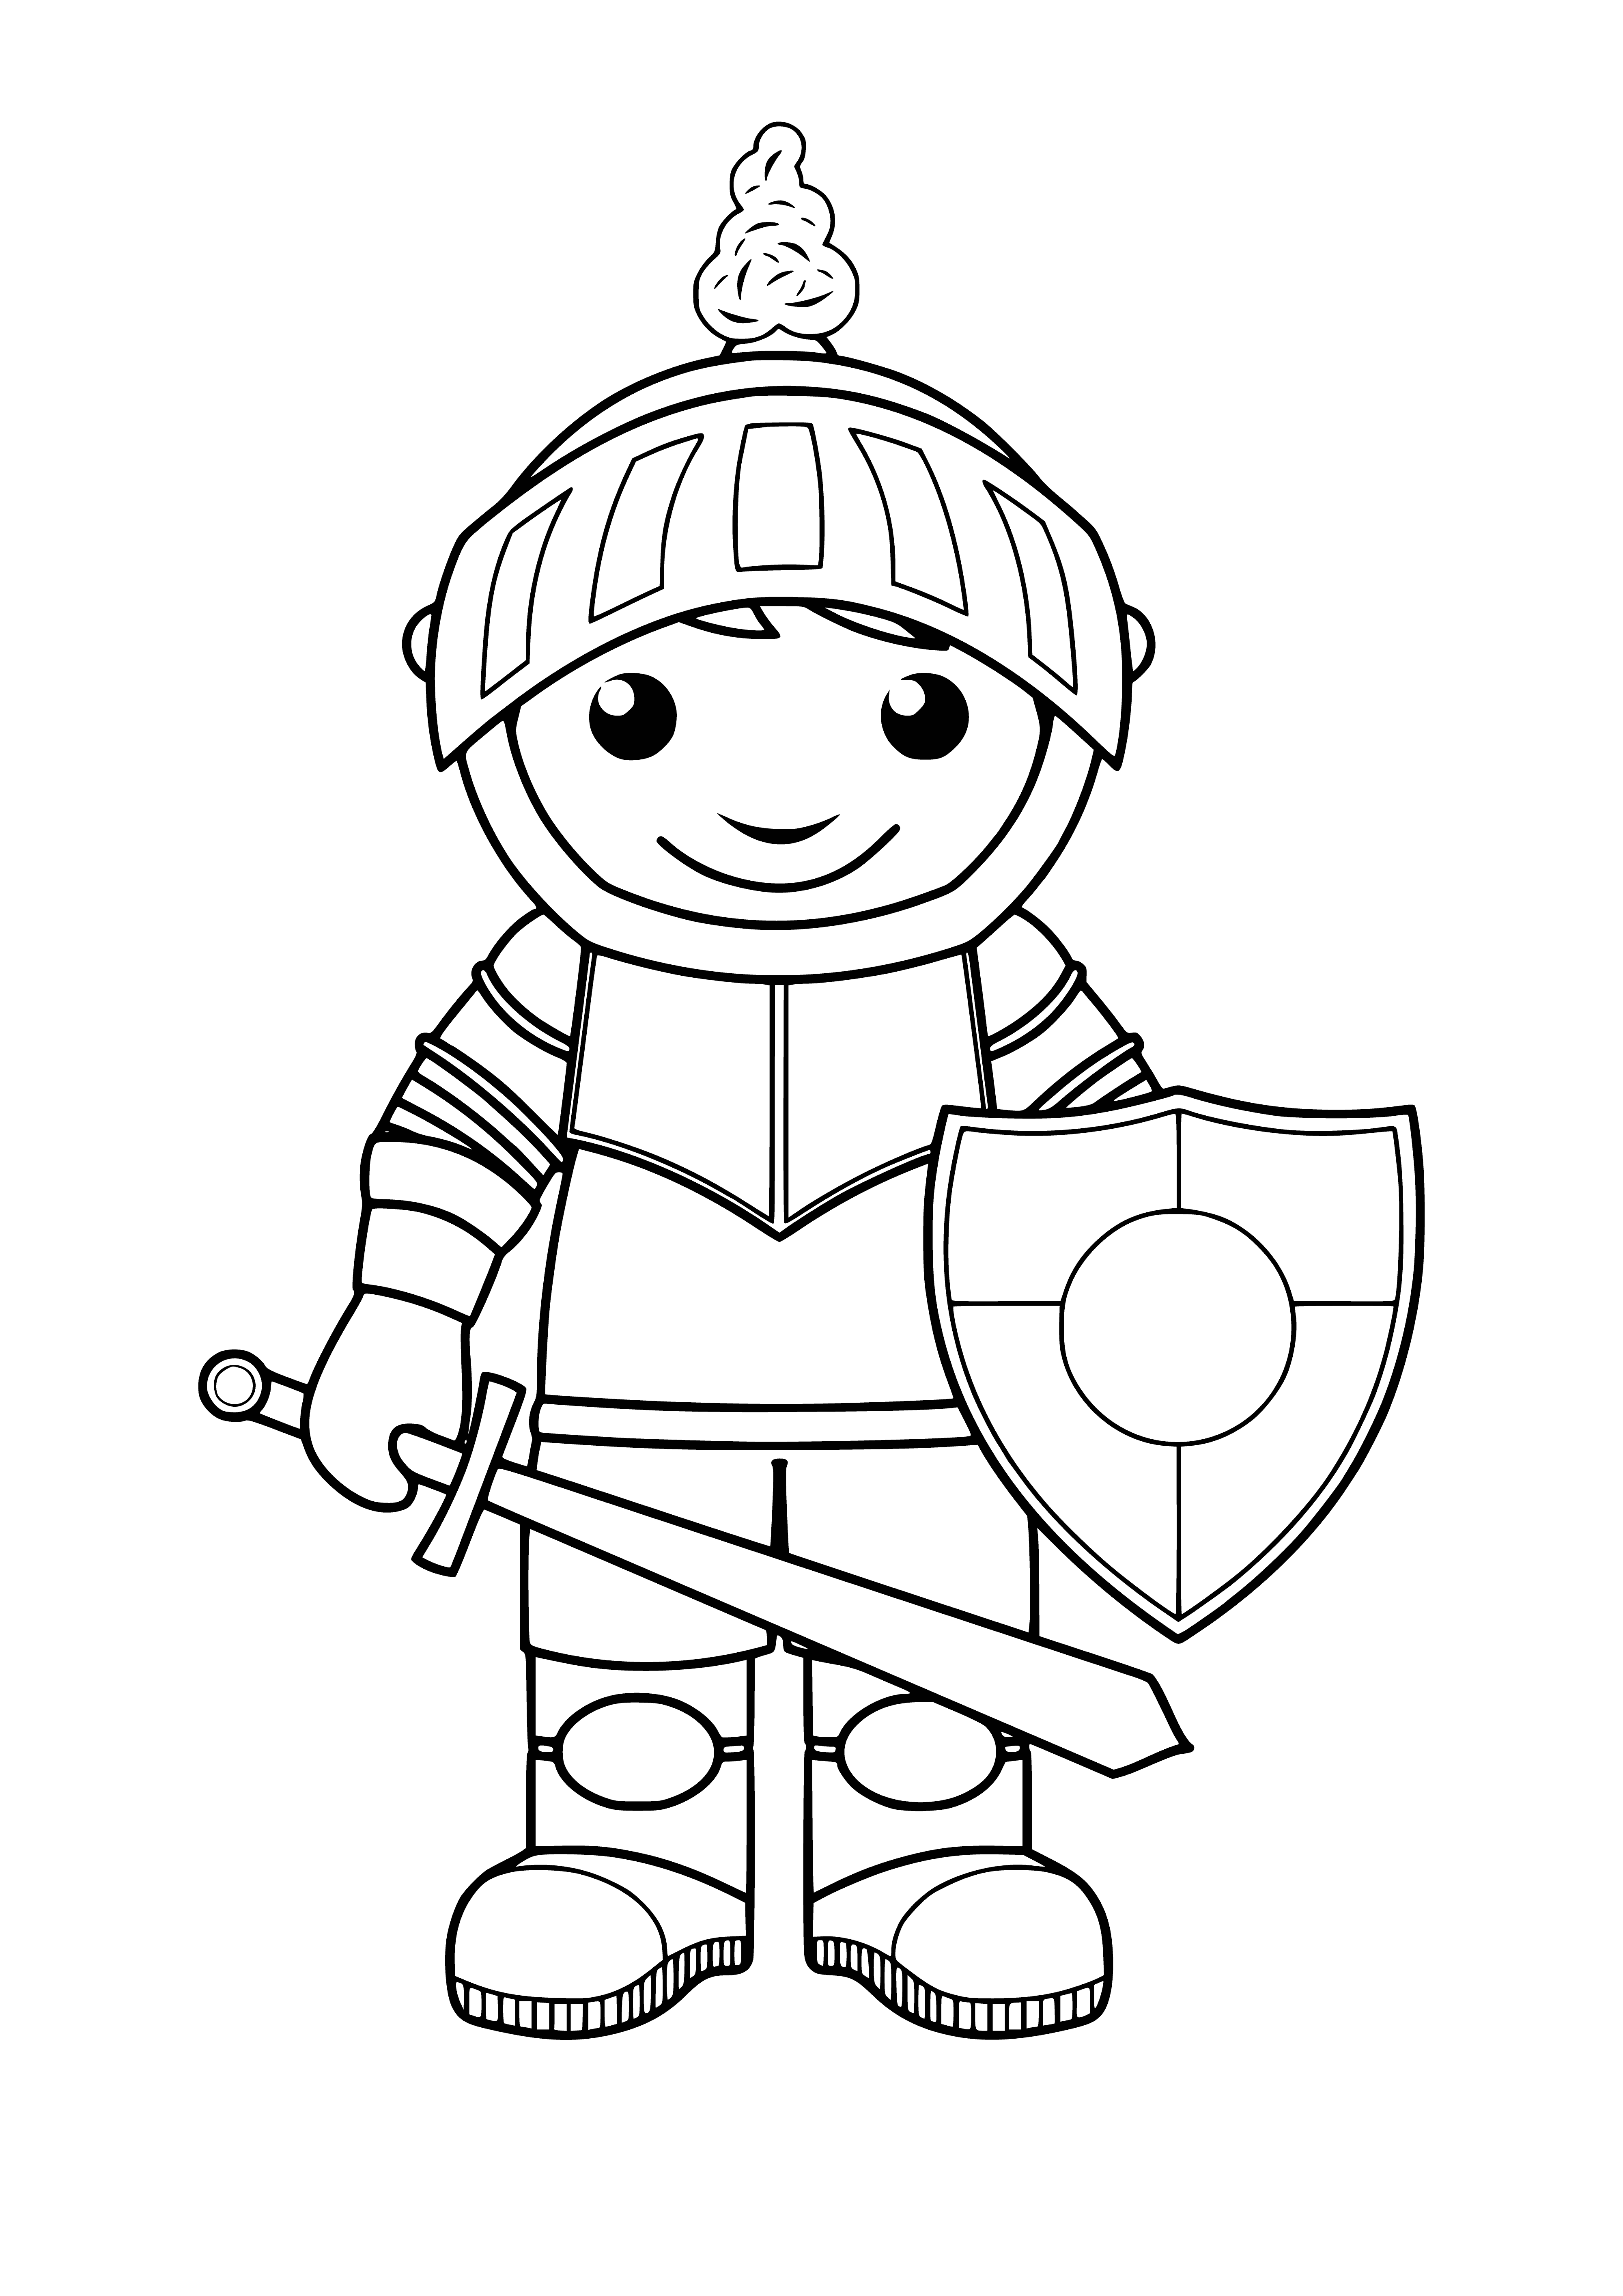 coloring page: Knights in armor ready to fight, with swords in hand, in a coloring page.